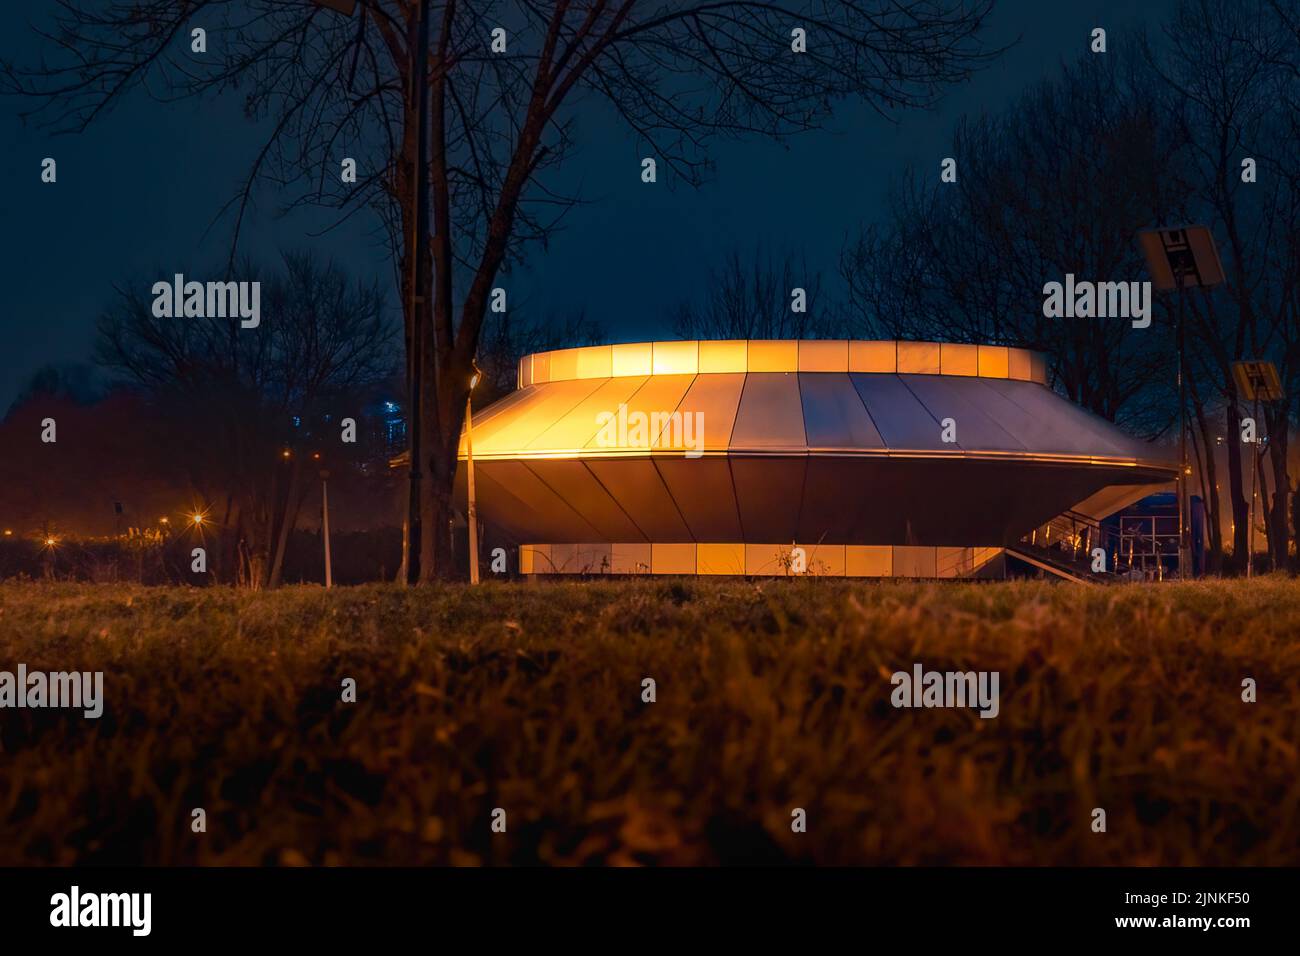 An UFO shaped construction in Tineretului Park, Bucharest at night Stock Photo